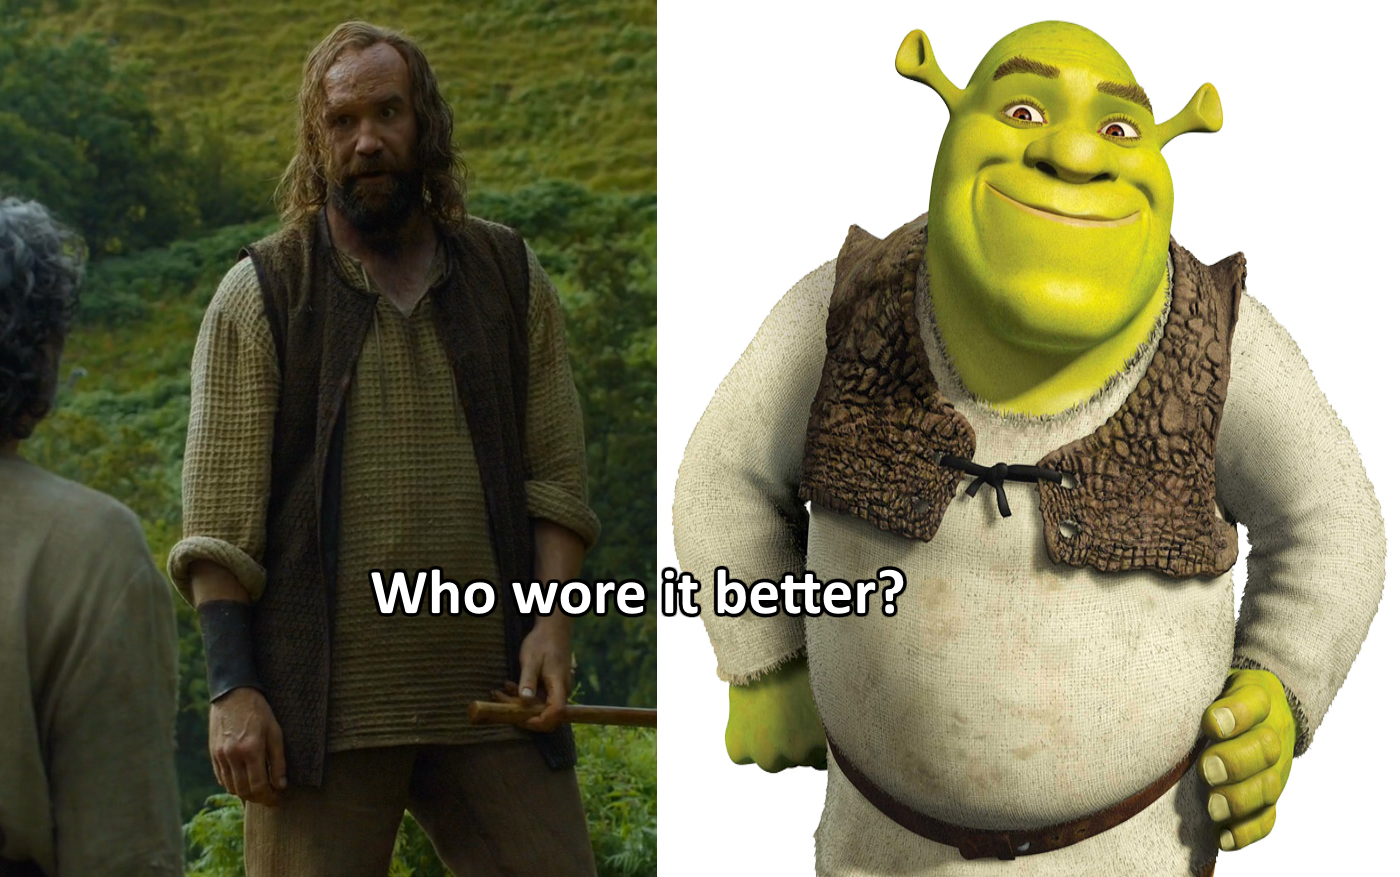 game of thrones shrek - Who wore it better?